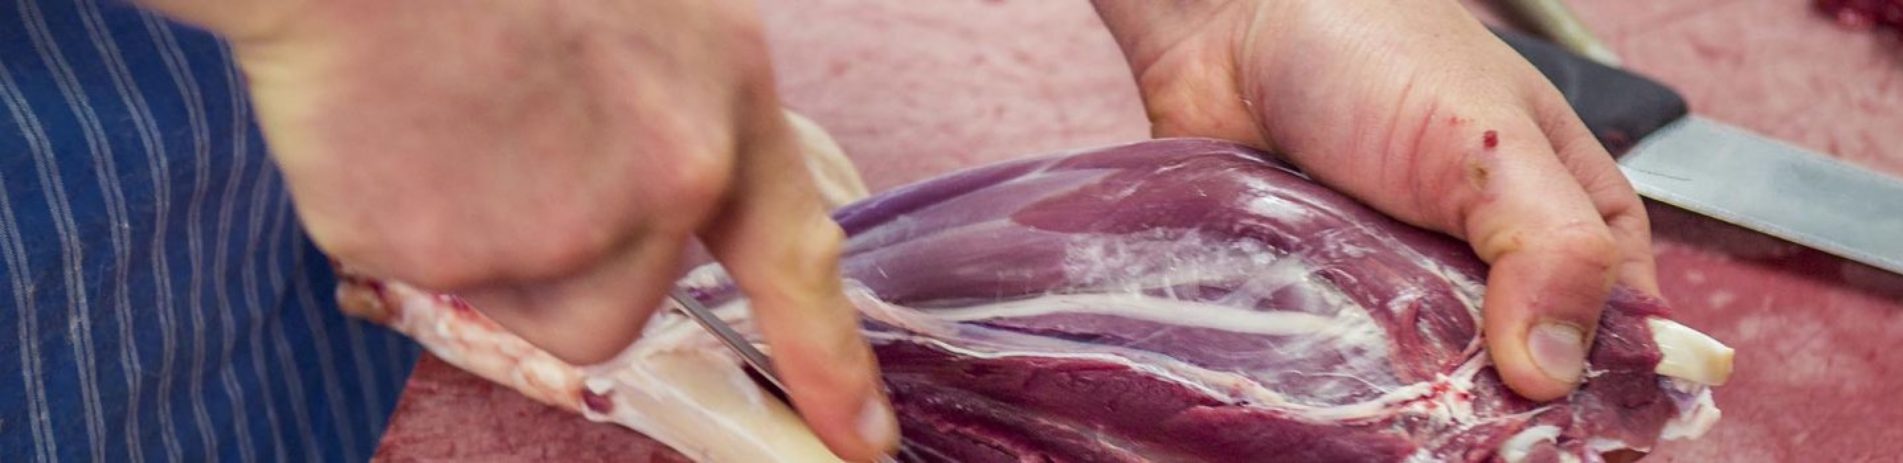 close-up-of-hands-cutting-raw-meat